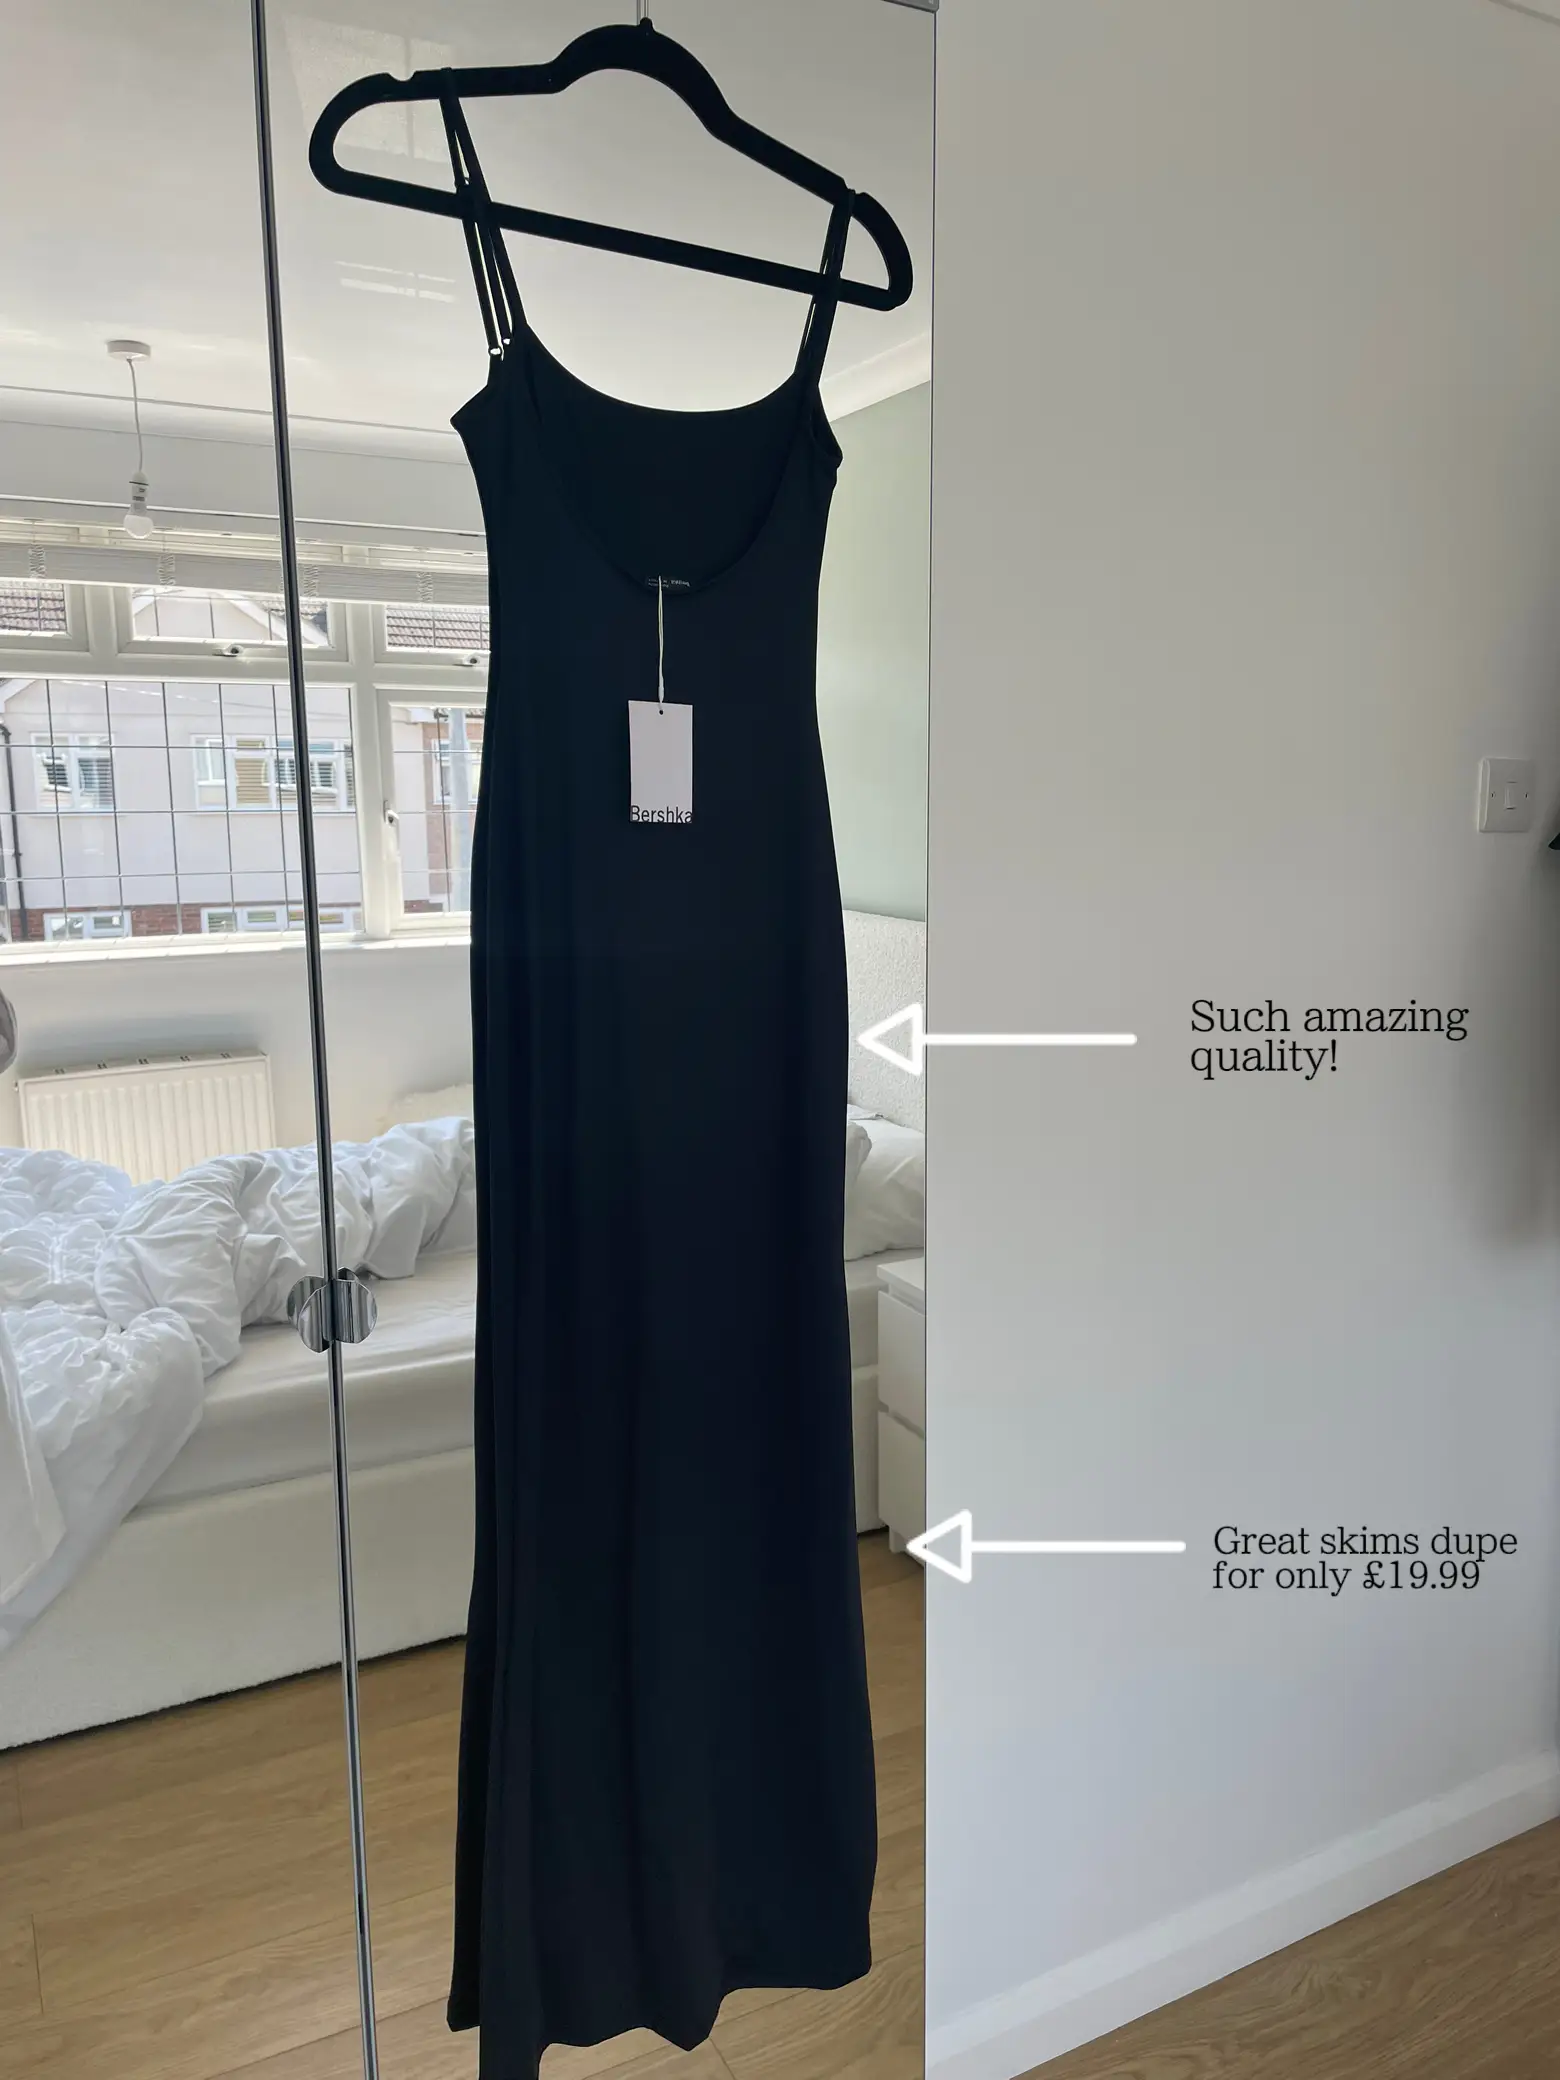 I tried the viral Bershka dress and it's identical to Skims - but it's £56  cheaper